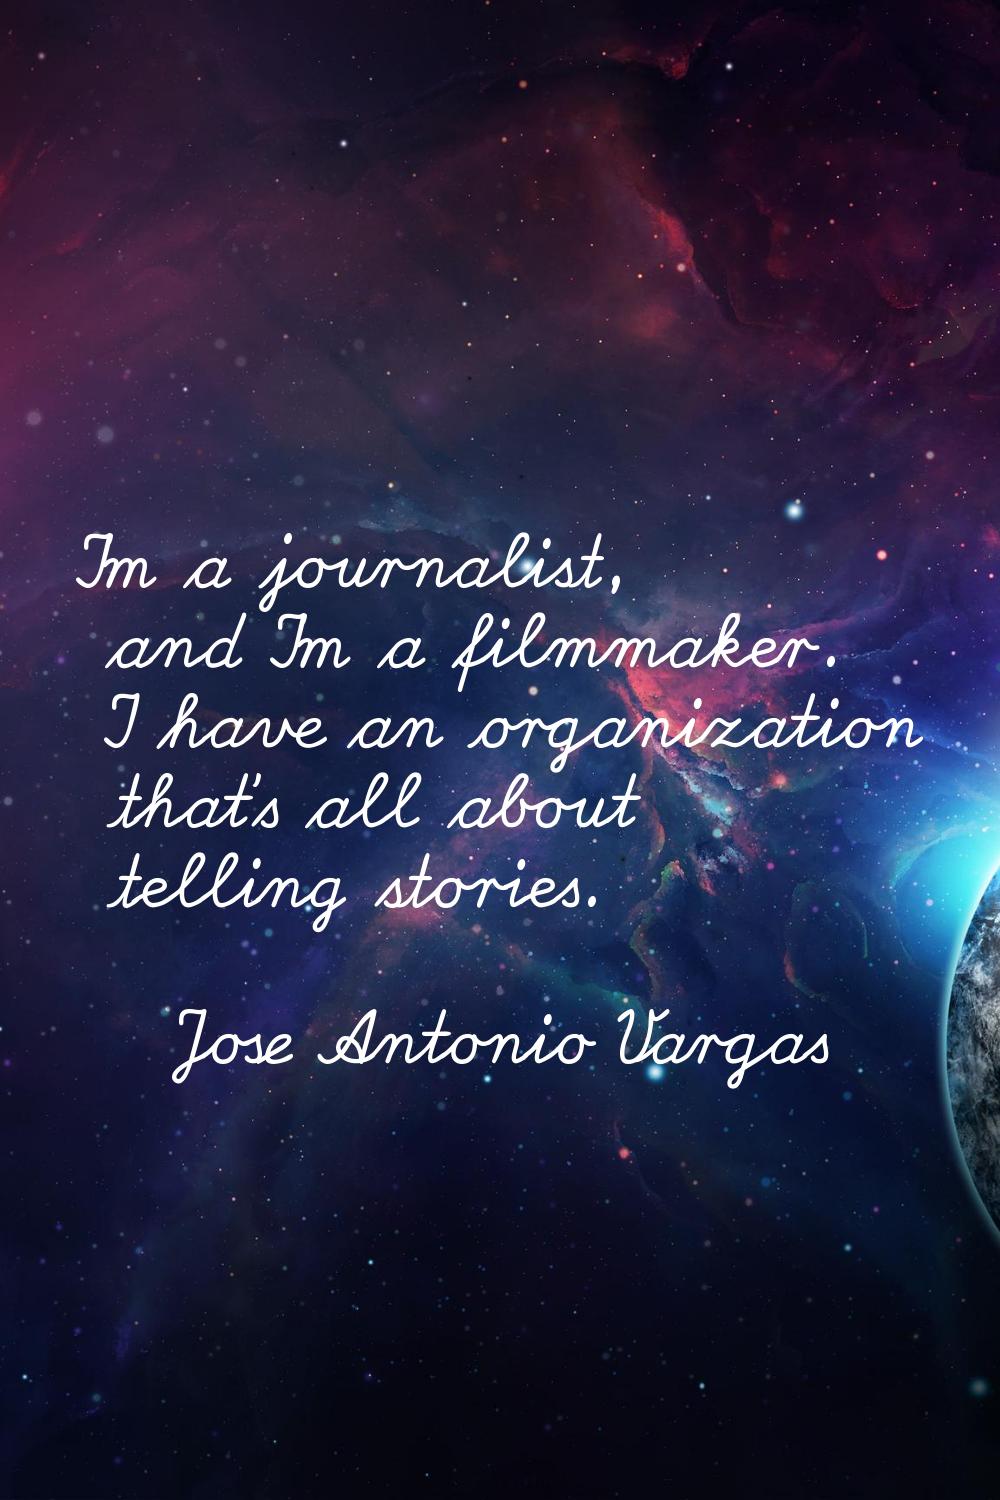 I'm a journalist, and I'm a filmmaker. I have an organization that's all about telling stories.